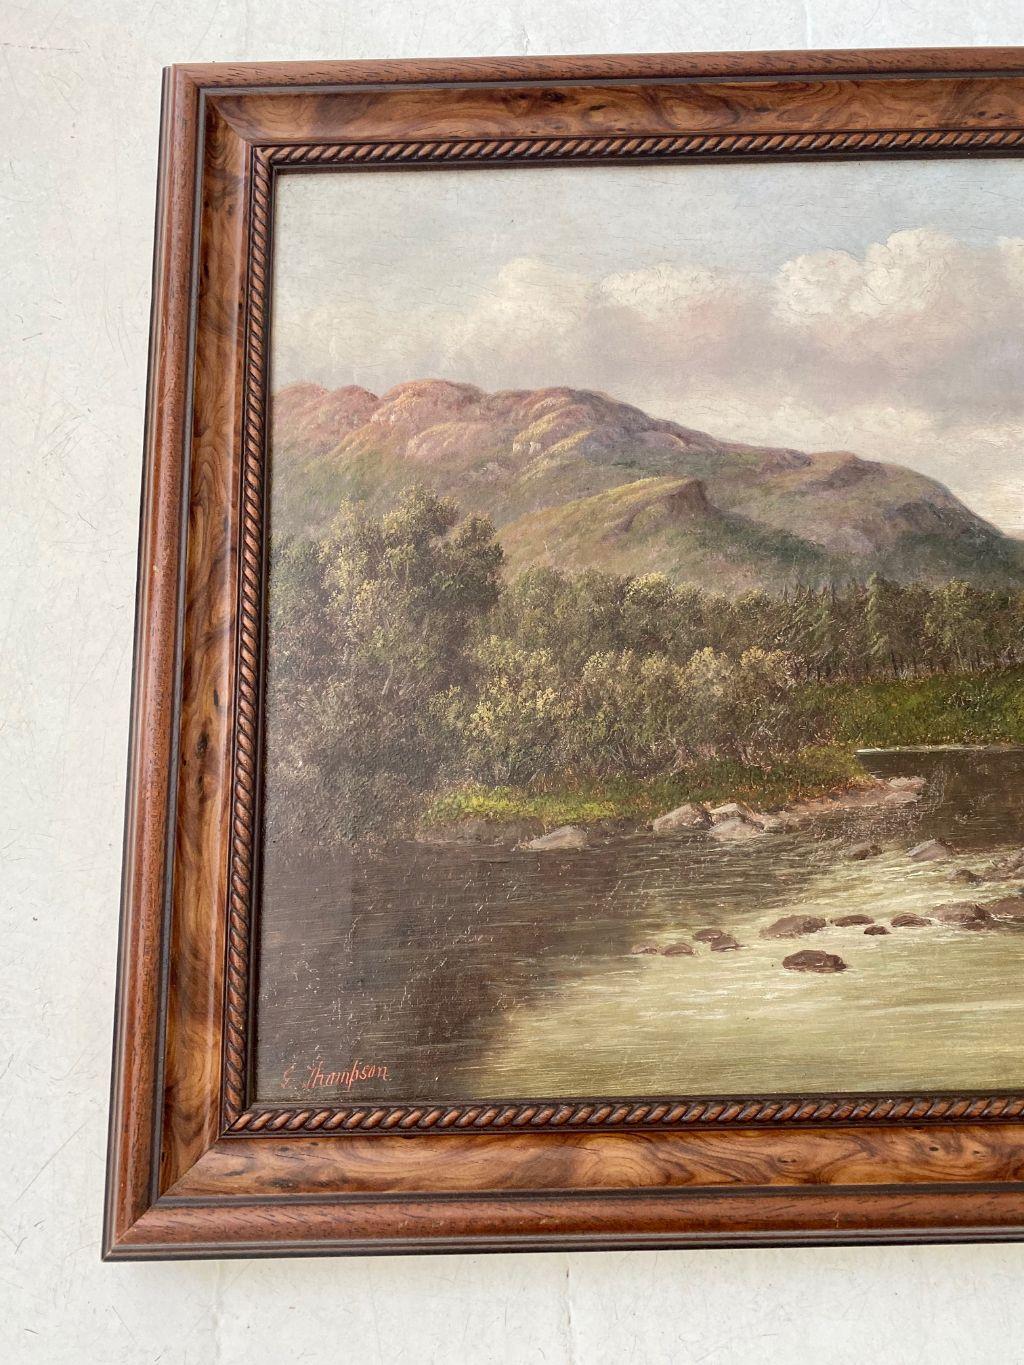 Antique Welsh River landscape with Fly Fisherman, by S. Thompson, 19th century, entitled 